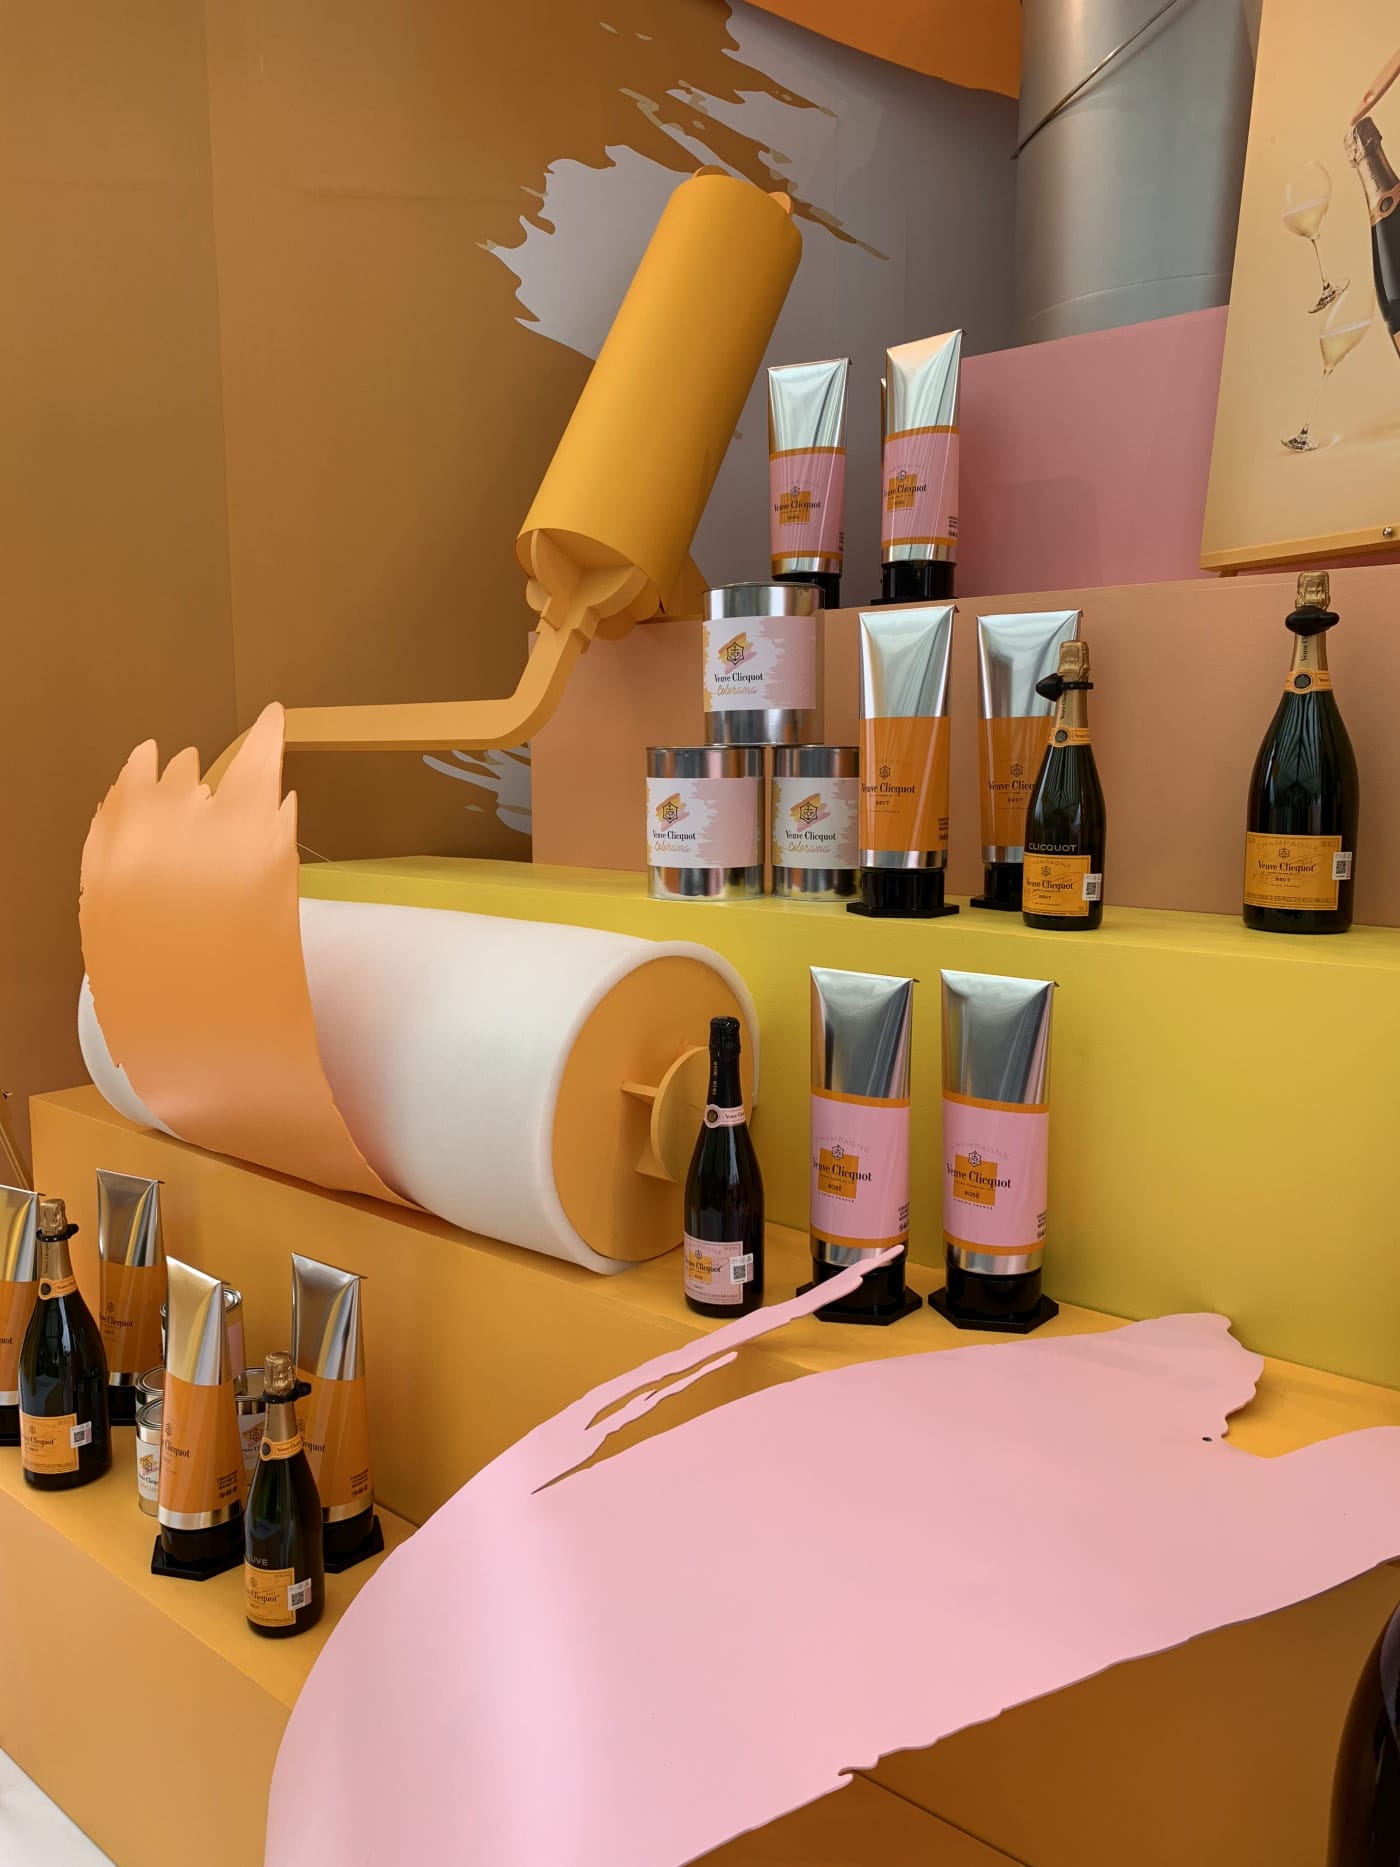 Duty Zero by CDF in world-first launch of Veuve Clicquot Colorama